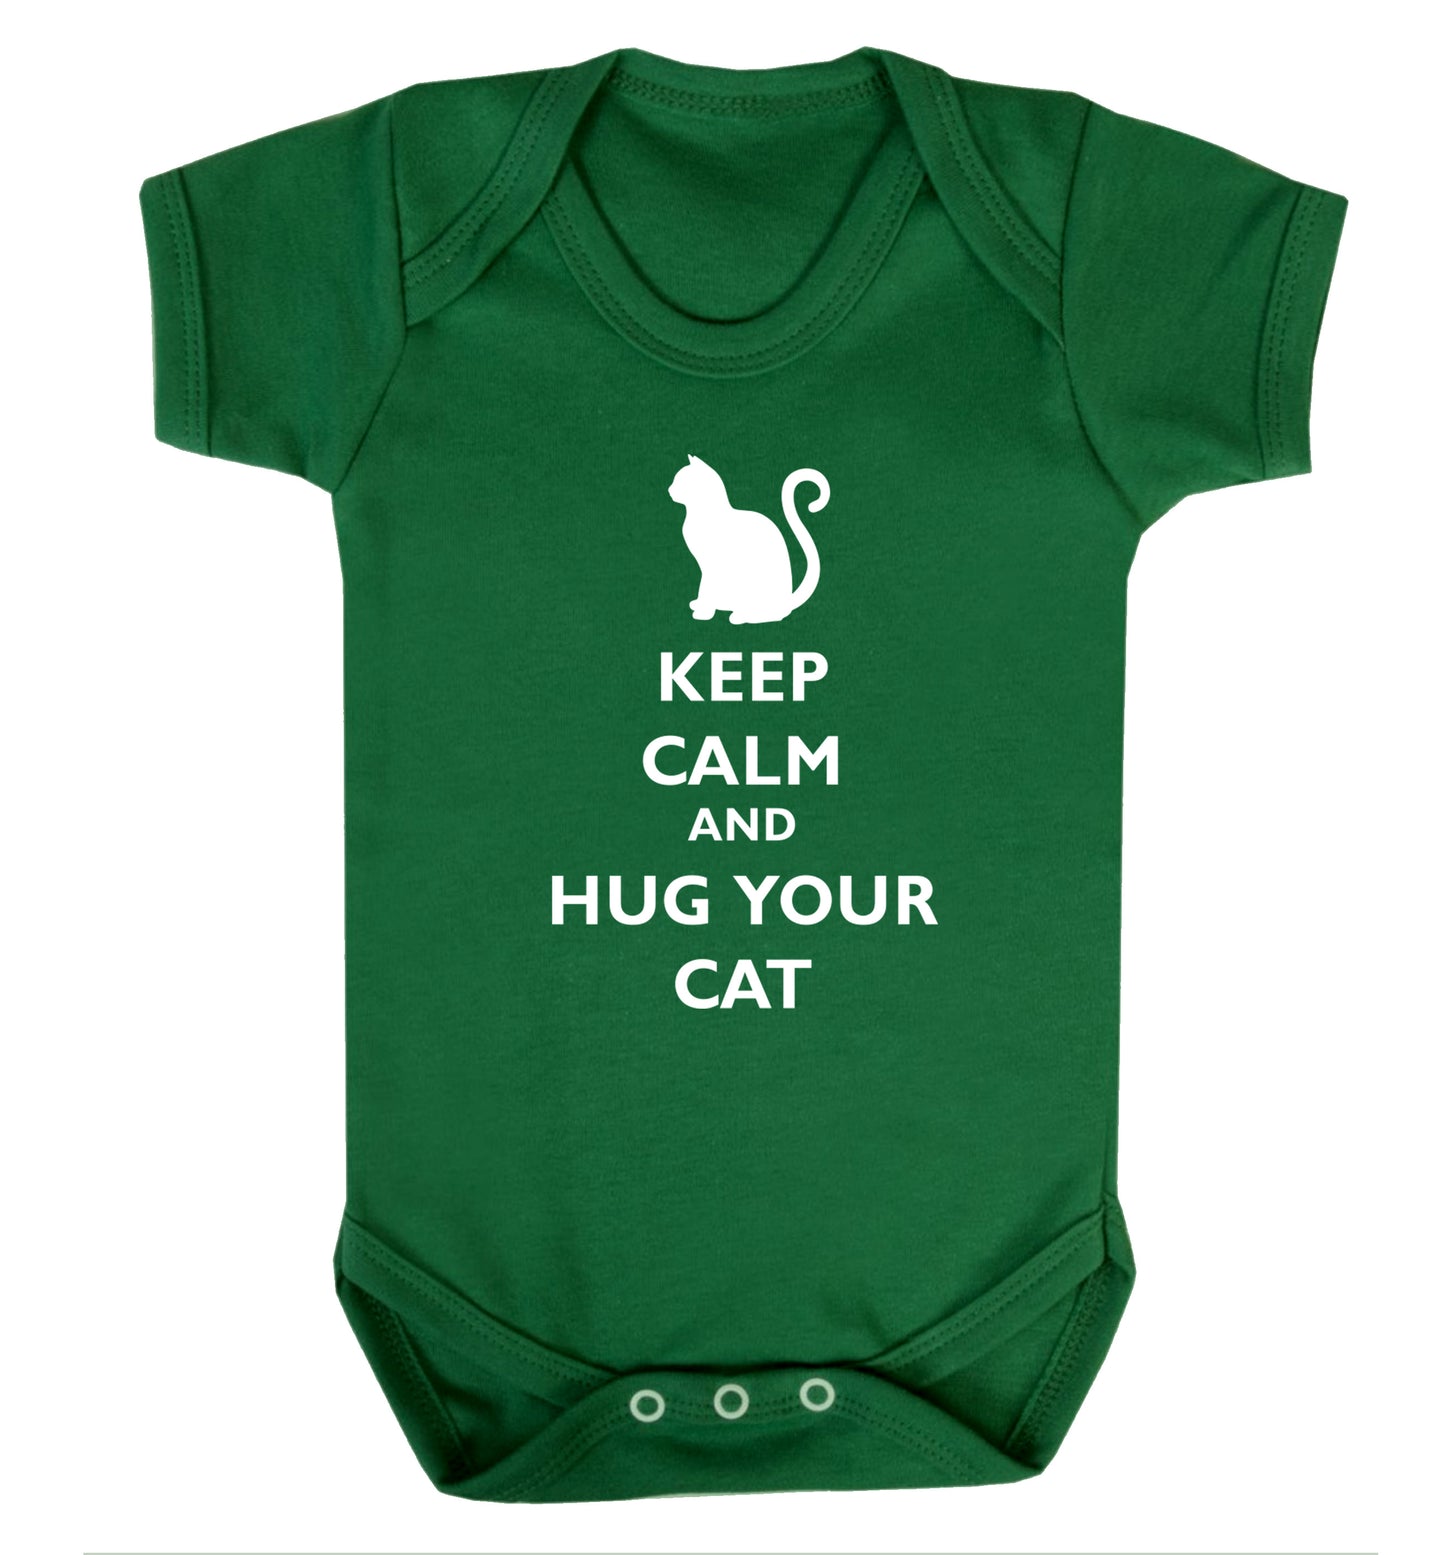 Keep calm and hug your cat Baby Vest green 18-24 months